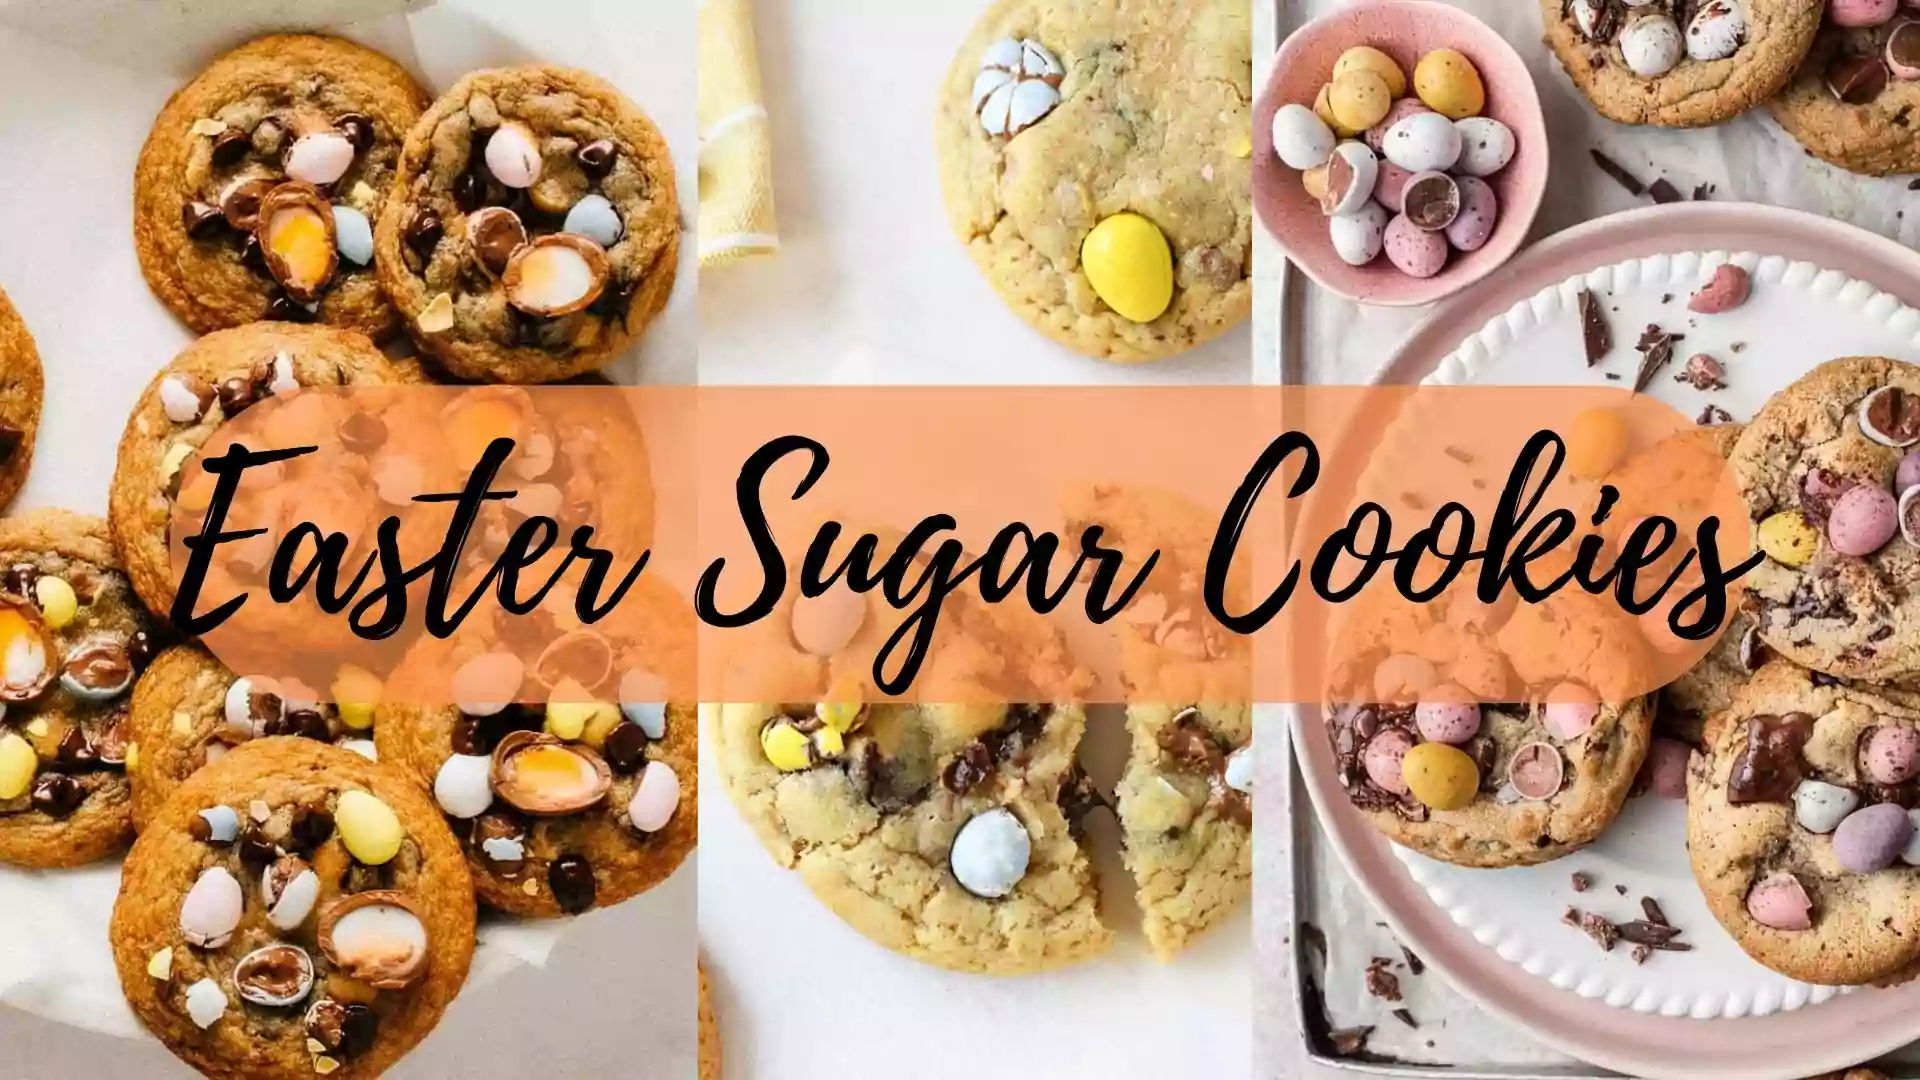 Easter Sugar Cookies wallpaper and images | Easter 2022